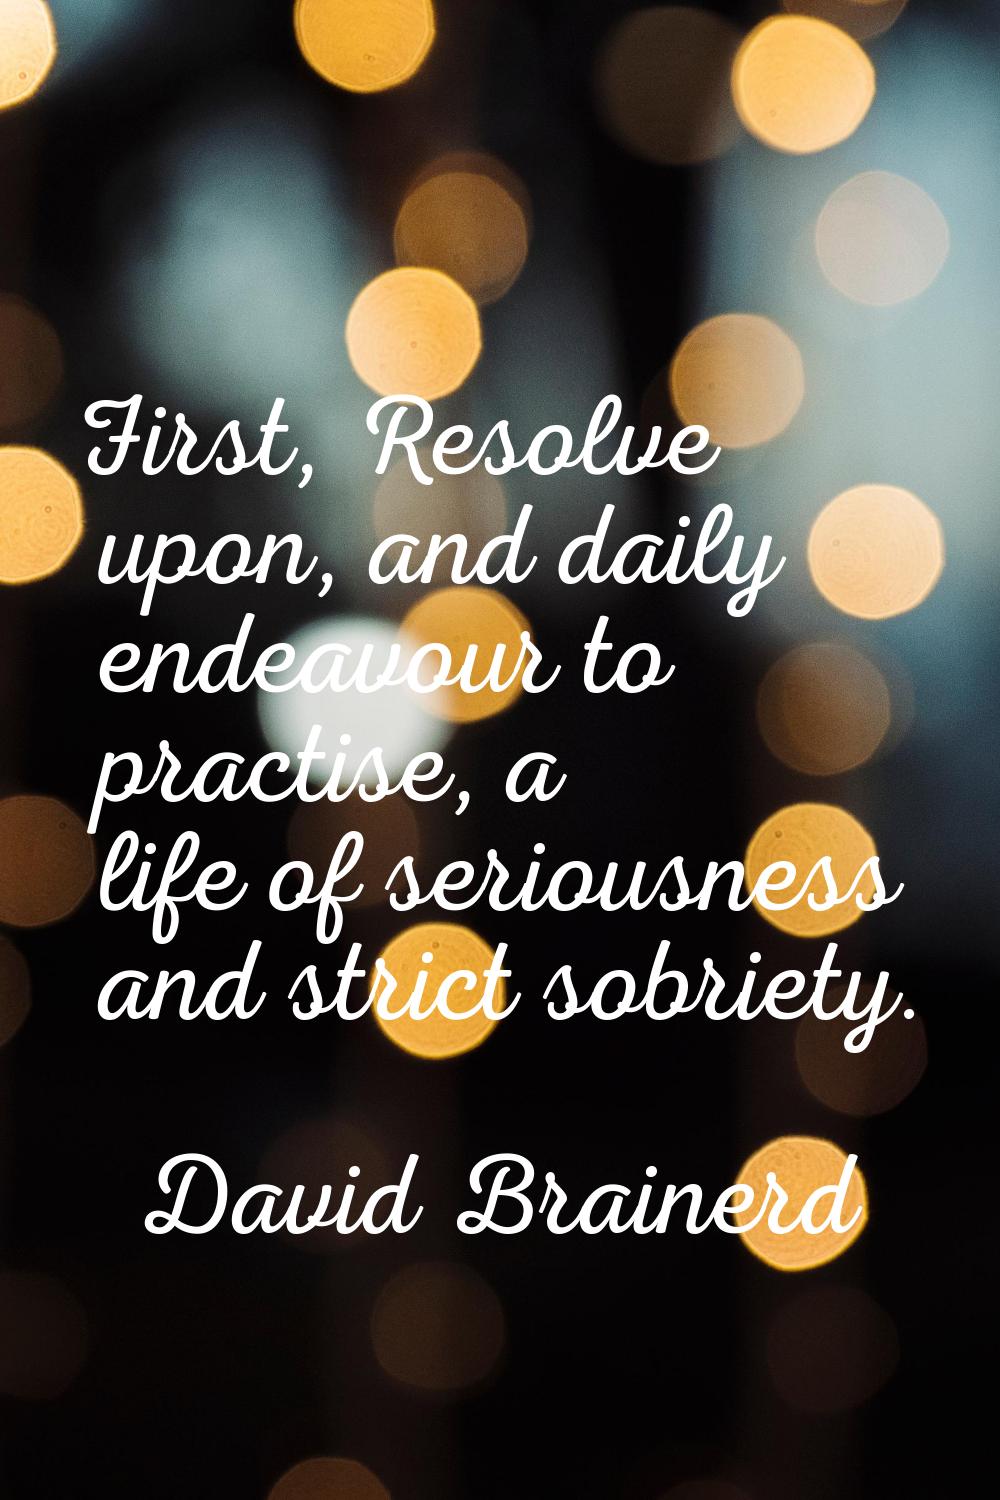 First, Resolve upon, and daily endeavour to practise, a life of seriousness and strict sobriety.